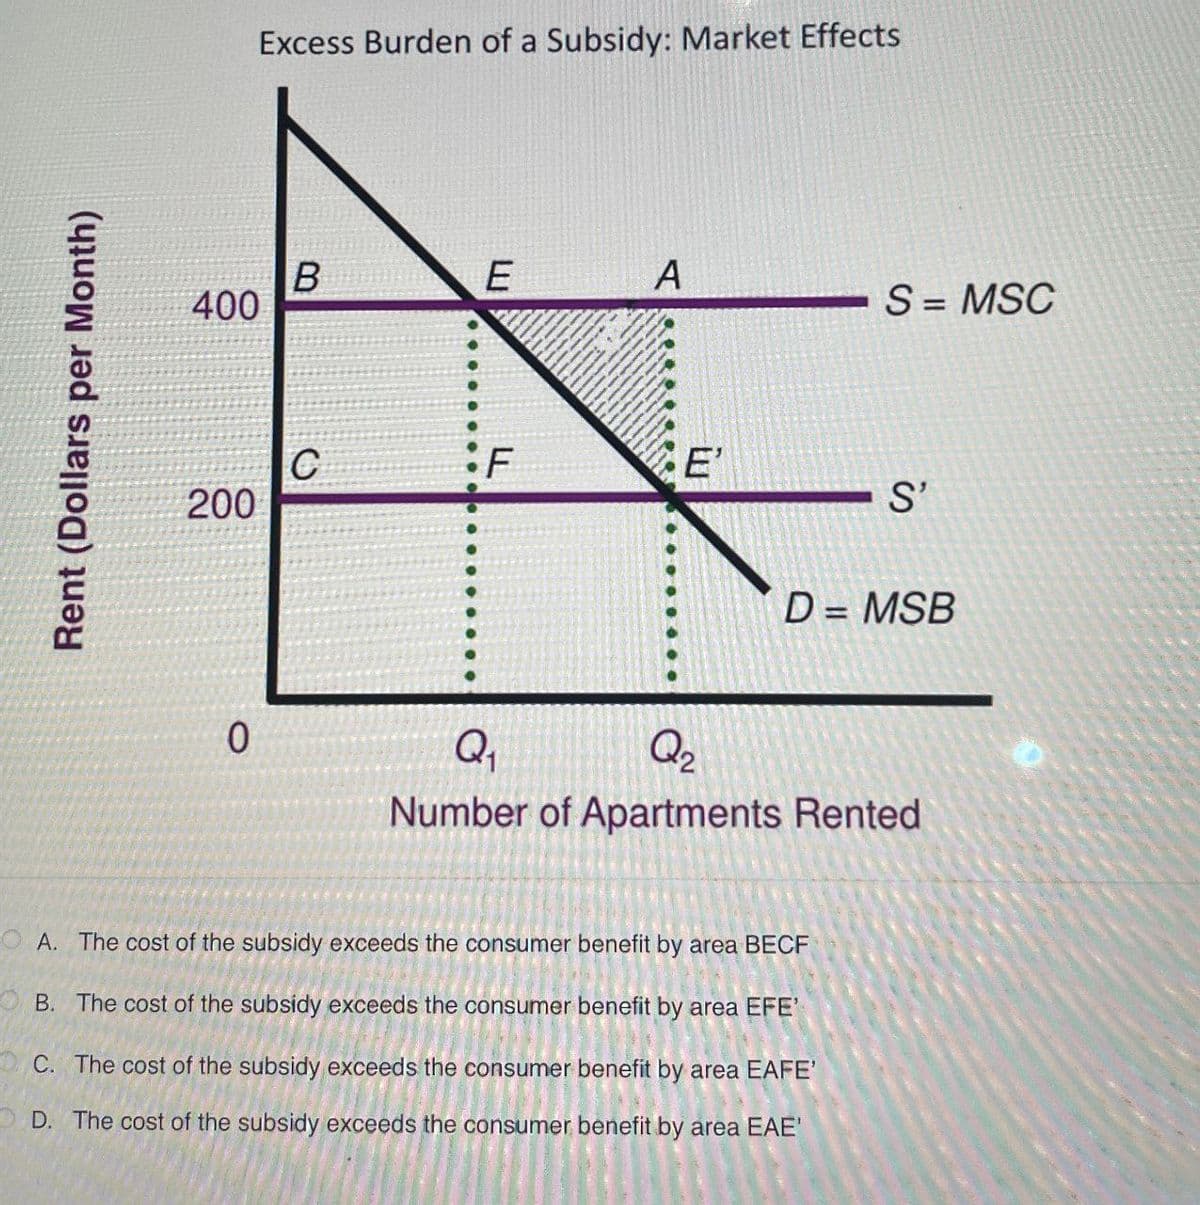 Rent (Dollars per Month)
400
200
Excess Burden of a Subsidy: Market Effects
C
B
0
Q₁
F
E
Q2
A
S = MSC
E'
S'
D= MSB
Number of Apartments Rented
A. The cost of the subsidy exceeds the consumer benefit by area BECF
B. The cost of the subsidy exceeds the consumer benefit by area EFE'
C. The cost of the subsidy exceeds the consumer benefit by area EAFE'
D. The cost of the subsidy exceeds the consumer benefit by area EAE'